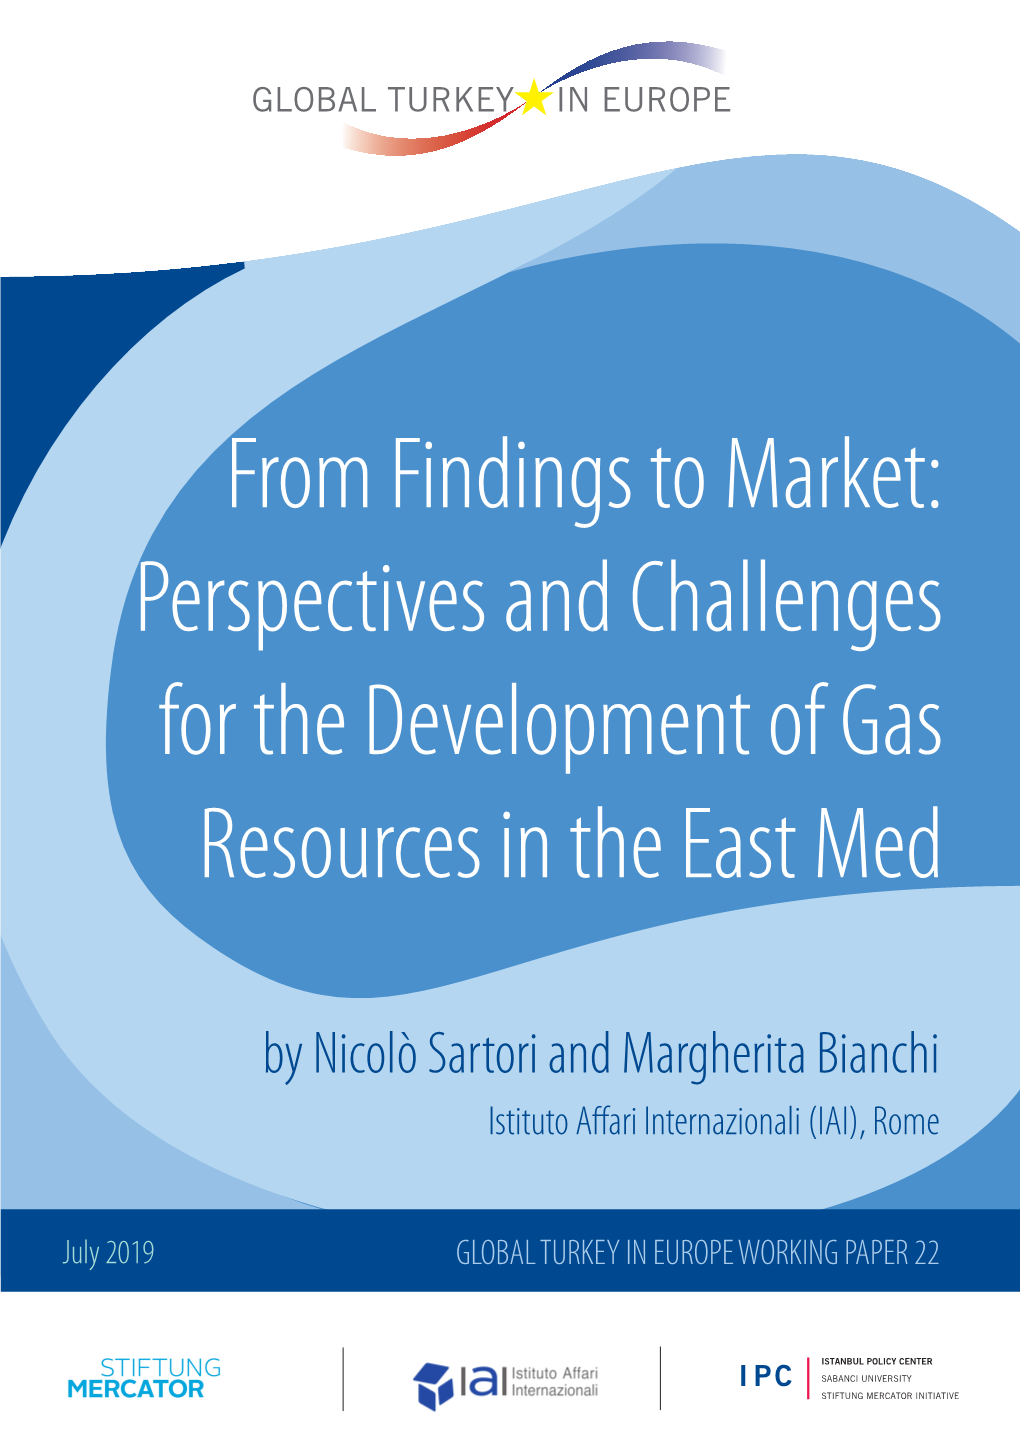 Perspectives and Challenges for the Development of Gas Resources in the East Med